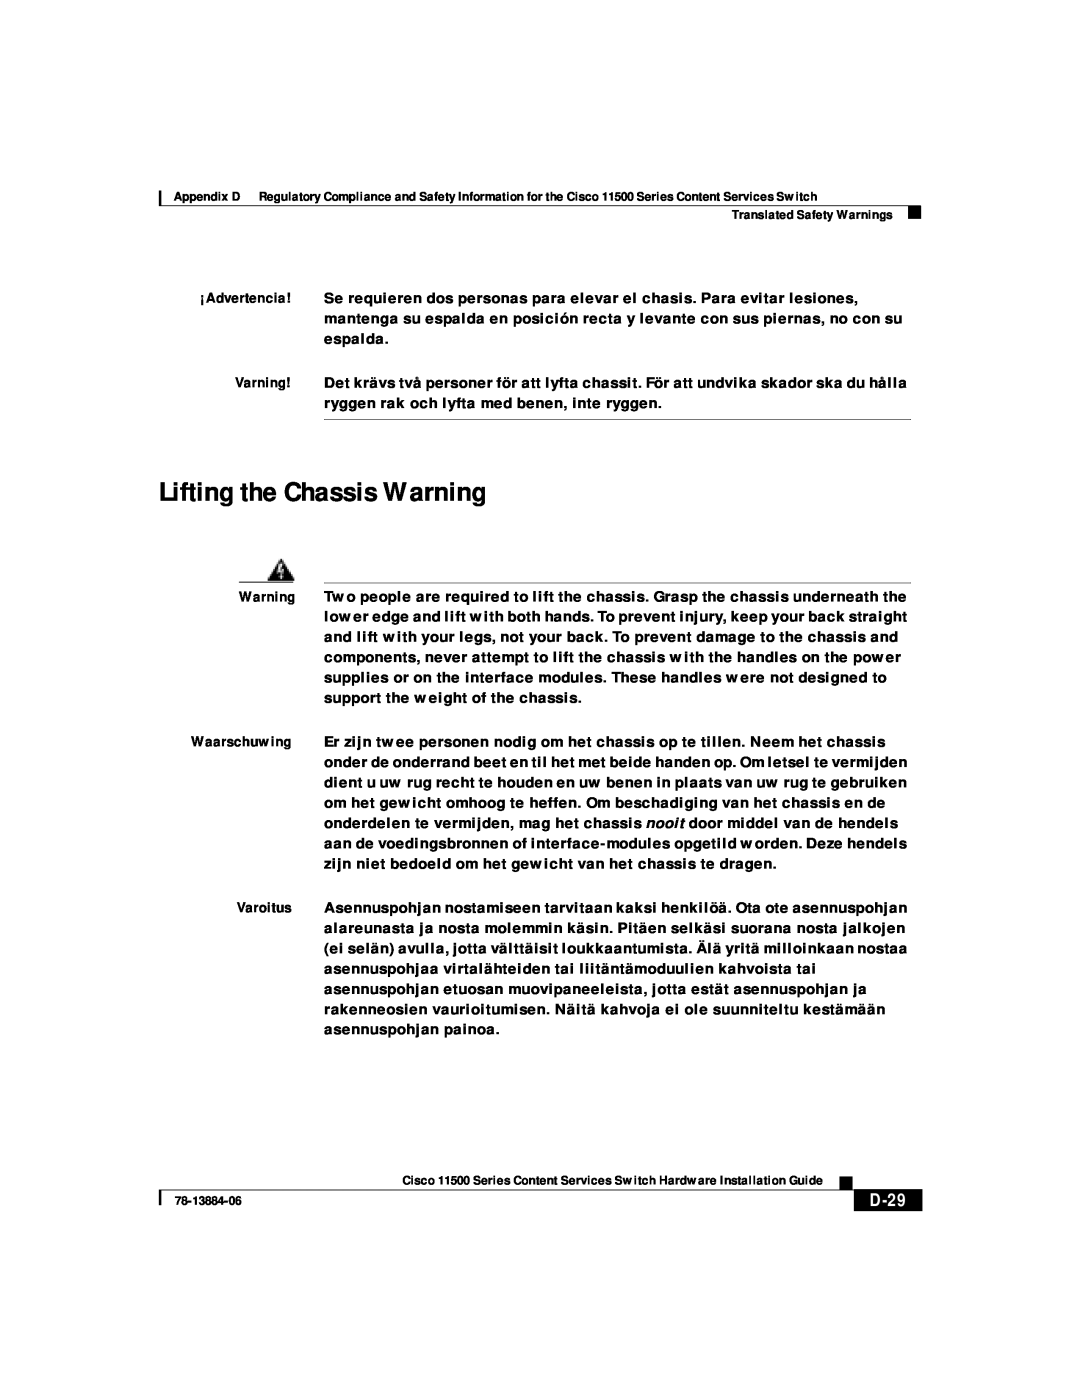 Cisco Systems 11500 Series manual Lifting the Chassis Warning, D-29 